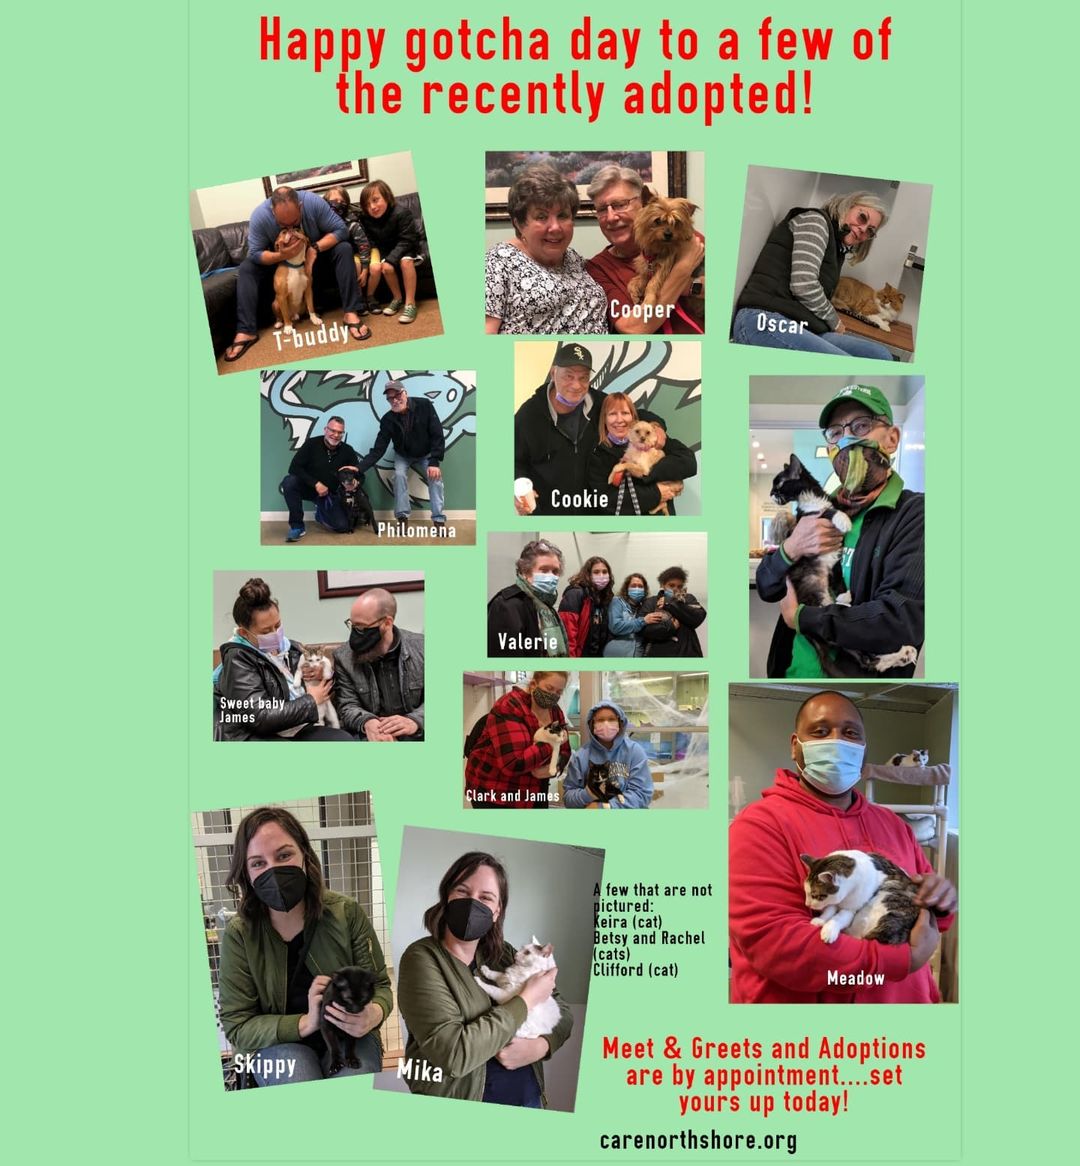 Just a few of our recent adoptions.  There was a total of 40 adoptions in the month of October.

<a target='_blank' href='https://www.instagram.com/explore/tags/adoptersrock/'>#adoptersrock</a> <a target='_blank' href='https://www.instagram.com/explore/tags/happygotchaday/'>#happygotchaday</a>